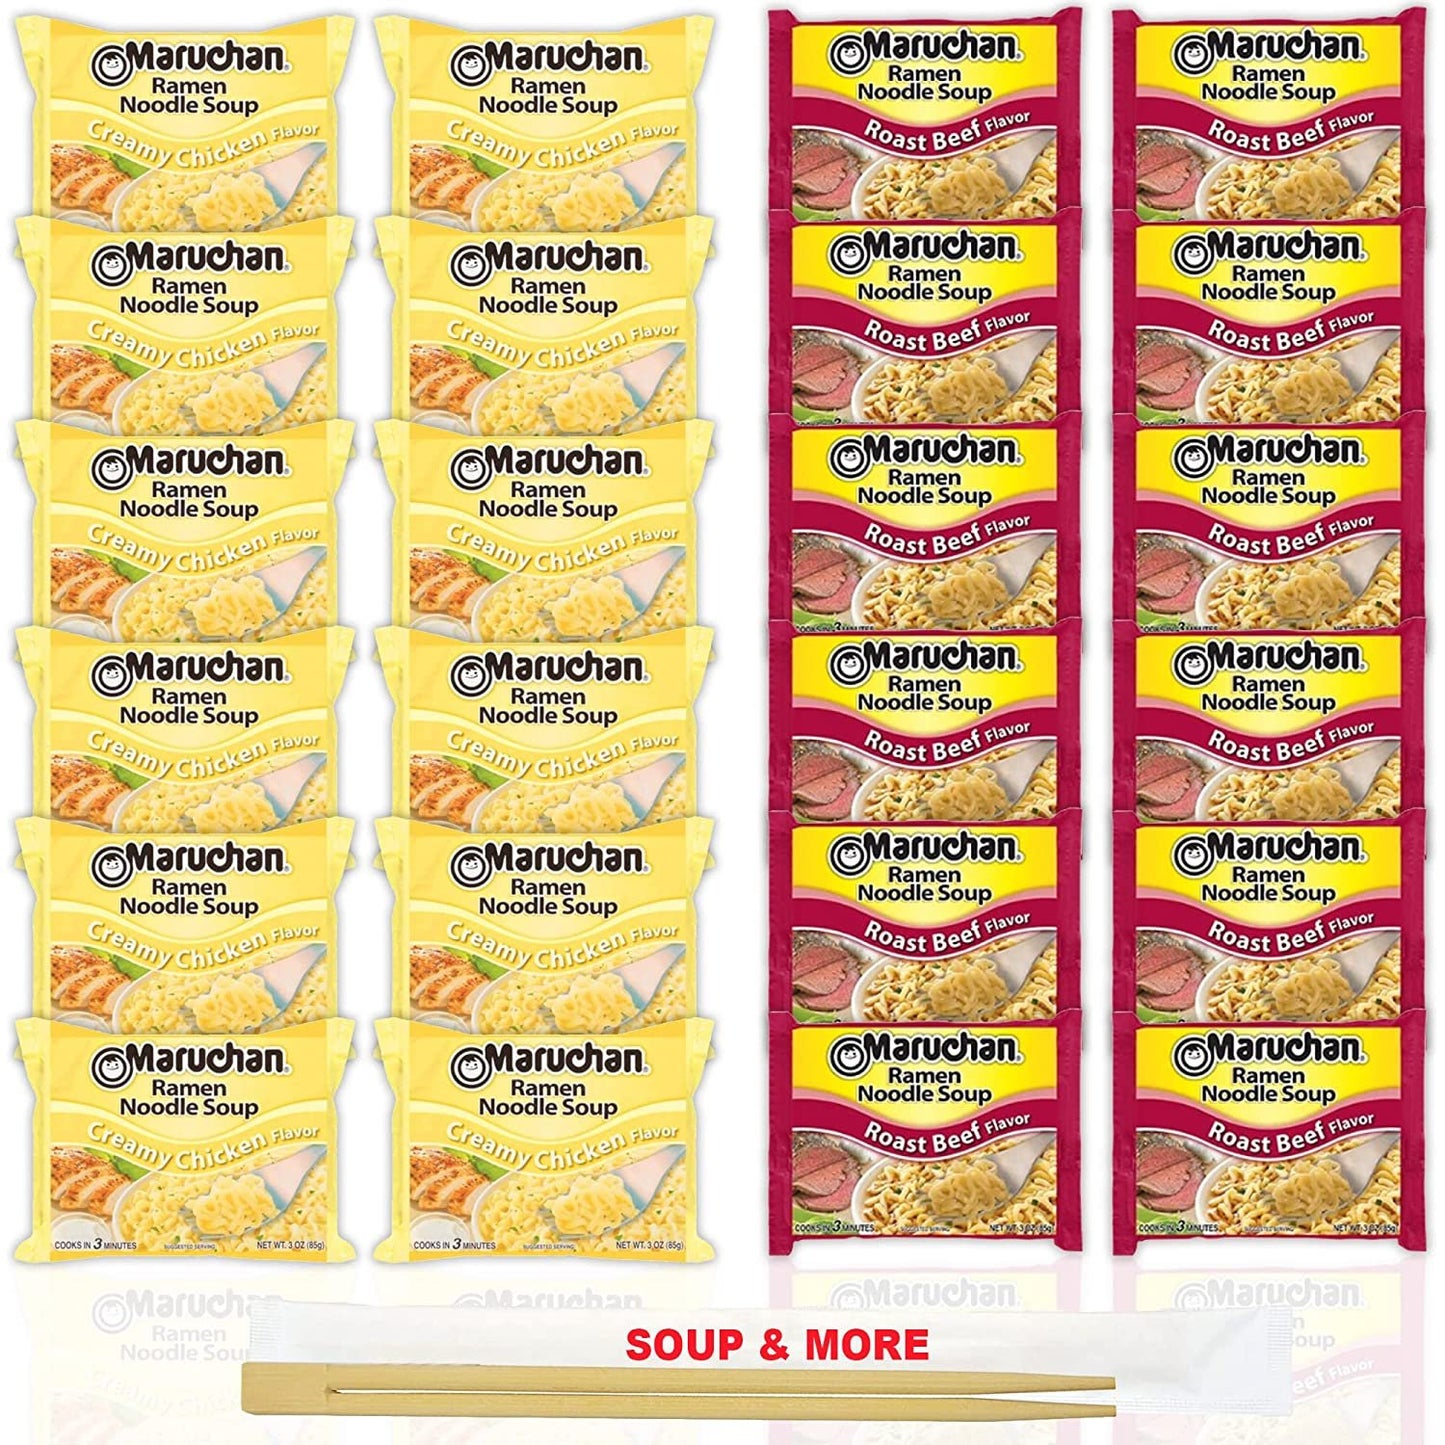 Maruchan Ramen Instant Noodle Soup Variety, 2 Flavors - 12 Packs Creamy Chicken & 12 Packs Roast Beef , 3 Ounce Single Servings Lunch / Dinner Variety